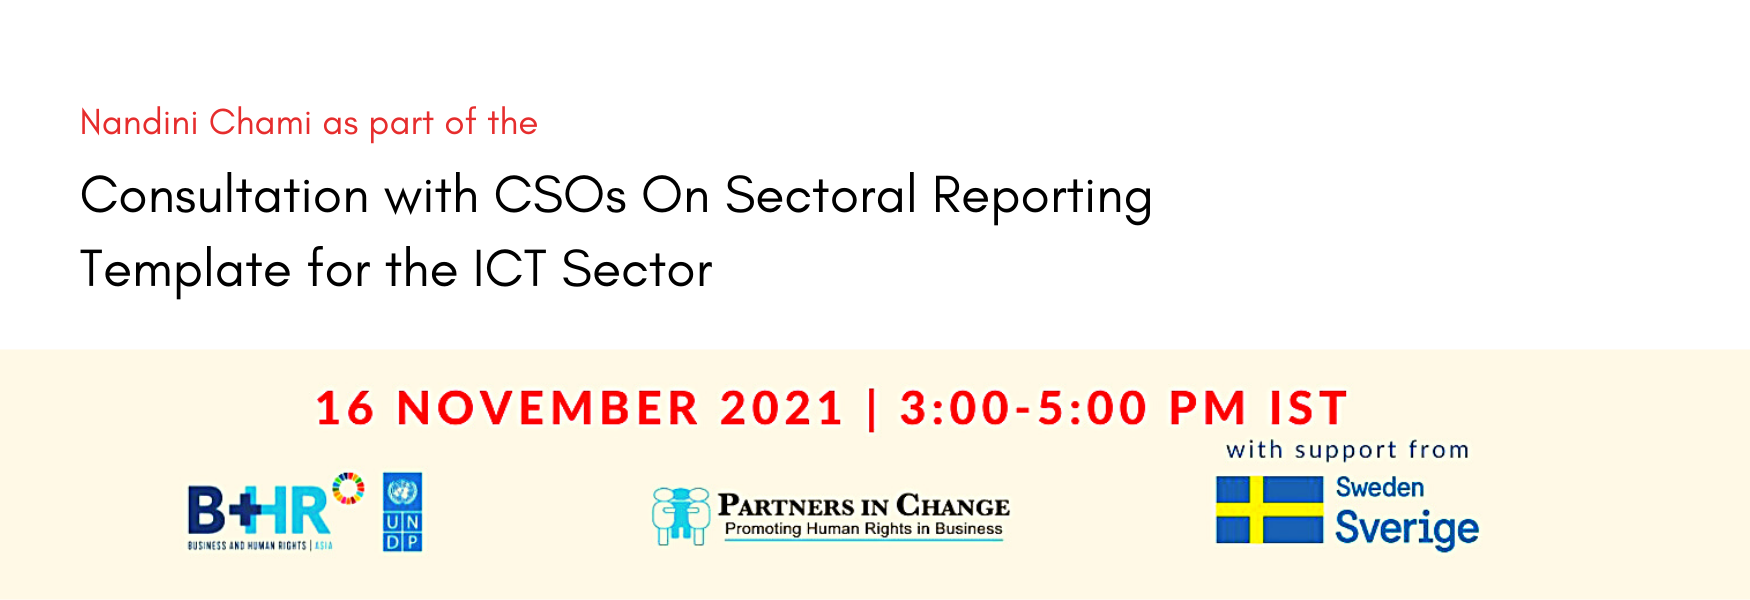 Consultation with CSOs On Sectoral Reporting Template for the ICT Sector